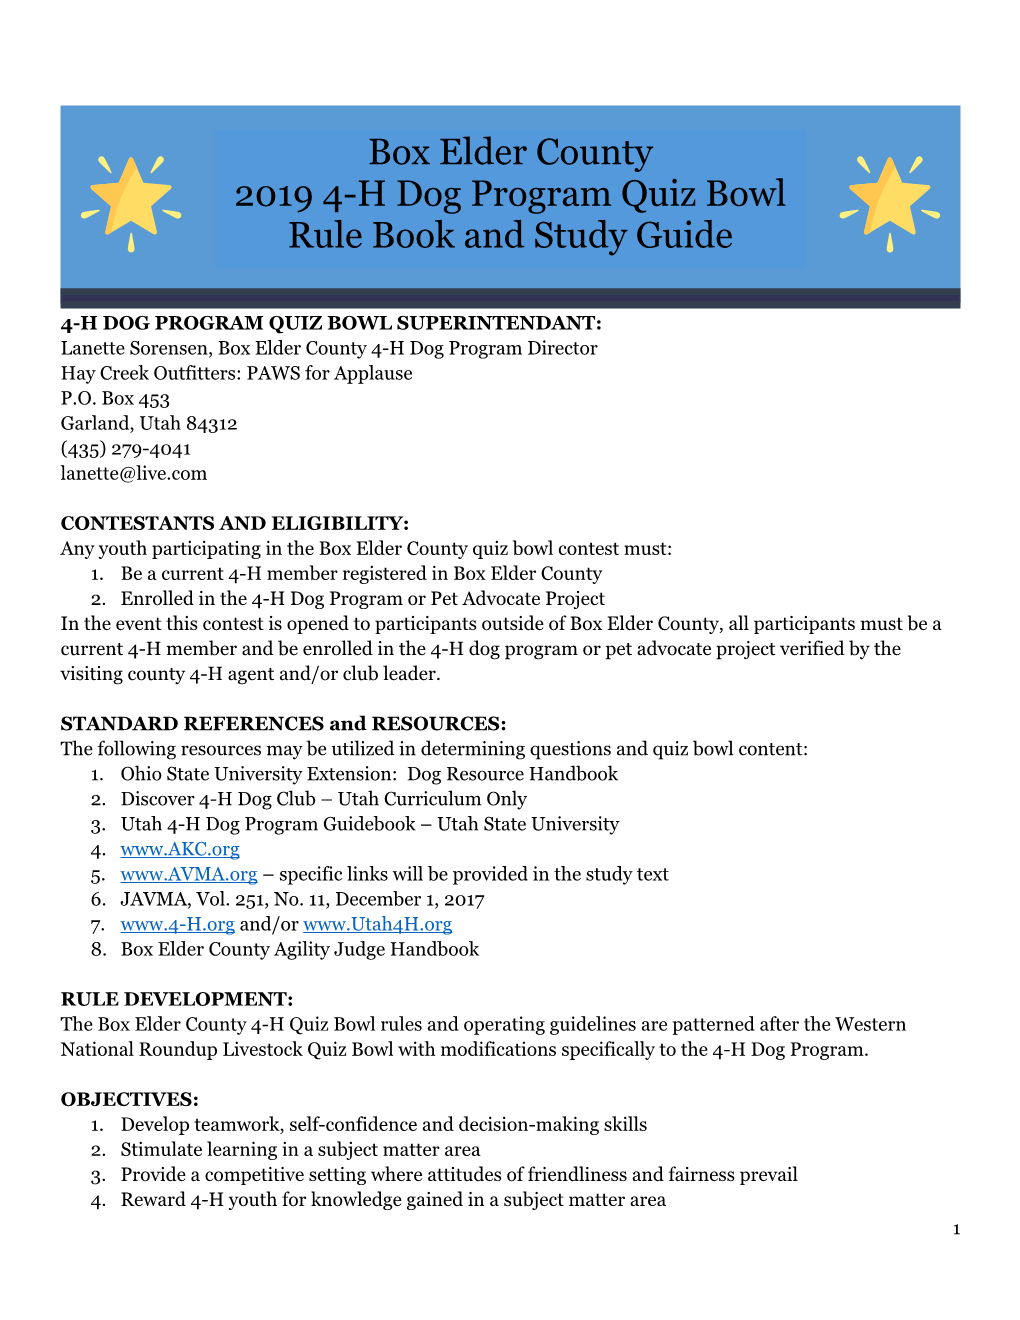 Box Elder County 2019 4-H Dog Program Quiz Bowl Rule Book and Study Guide